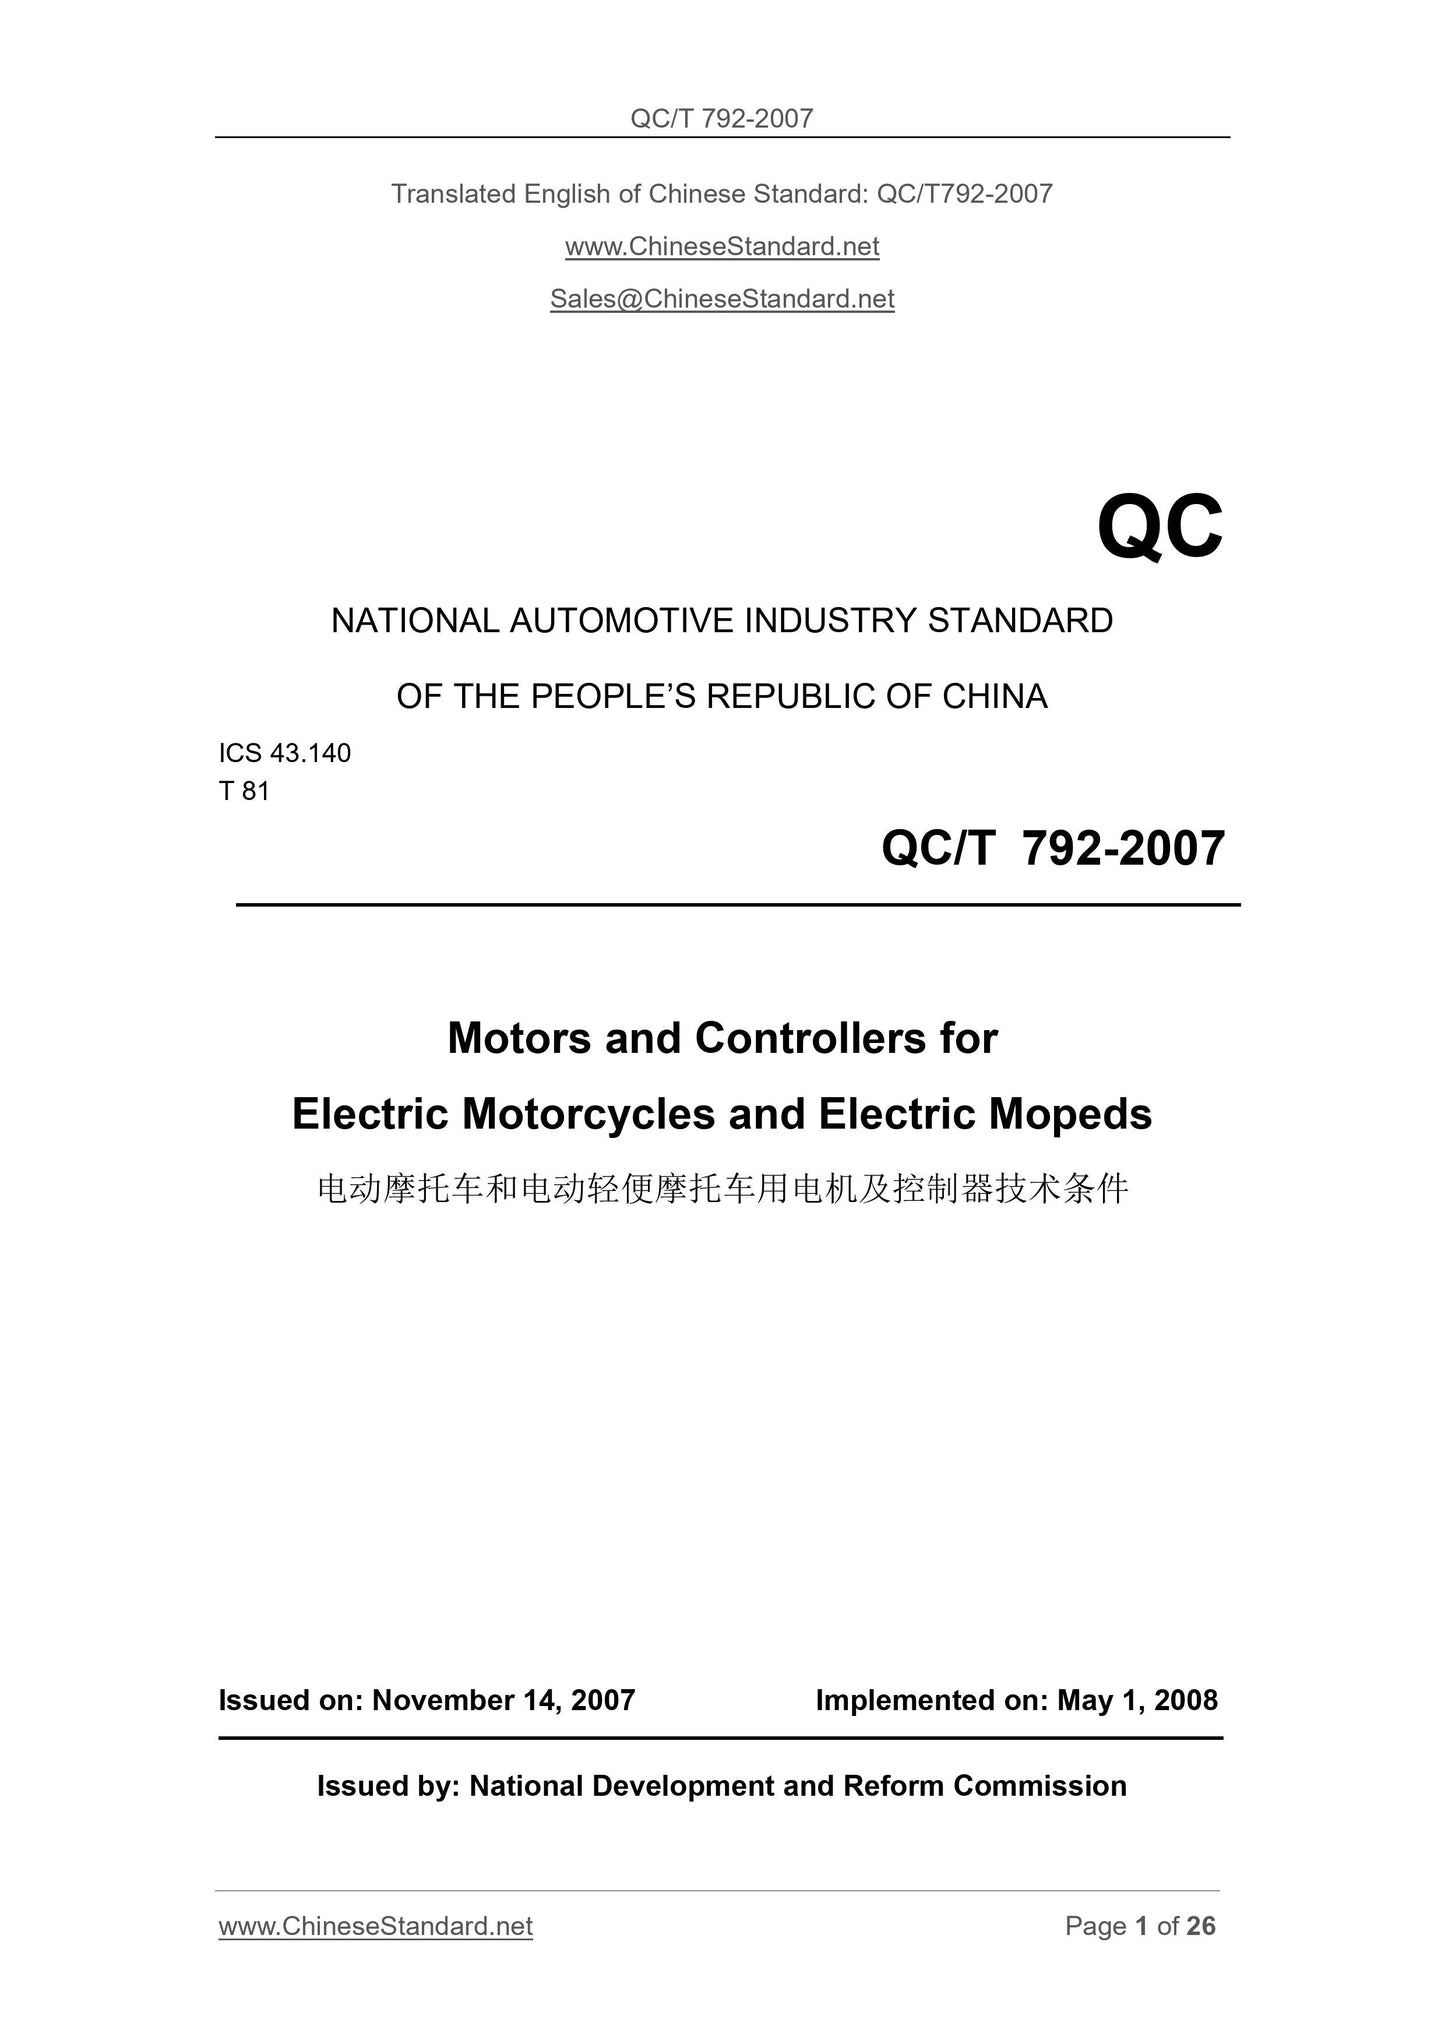 QC/T 792-2007 Page 1